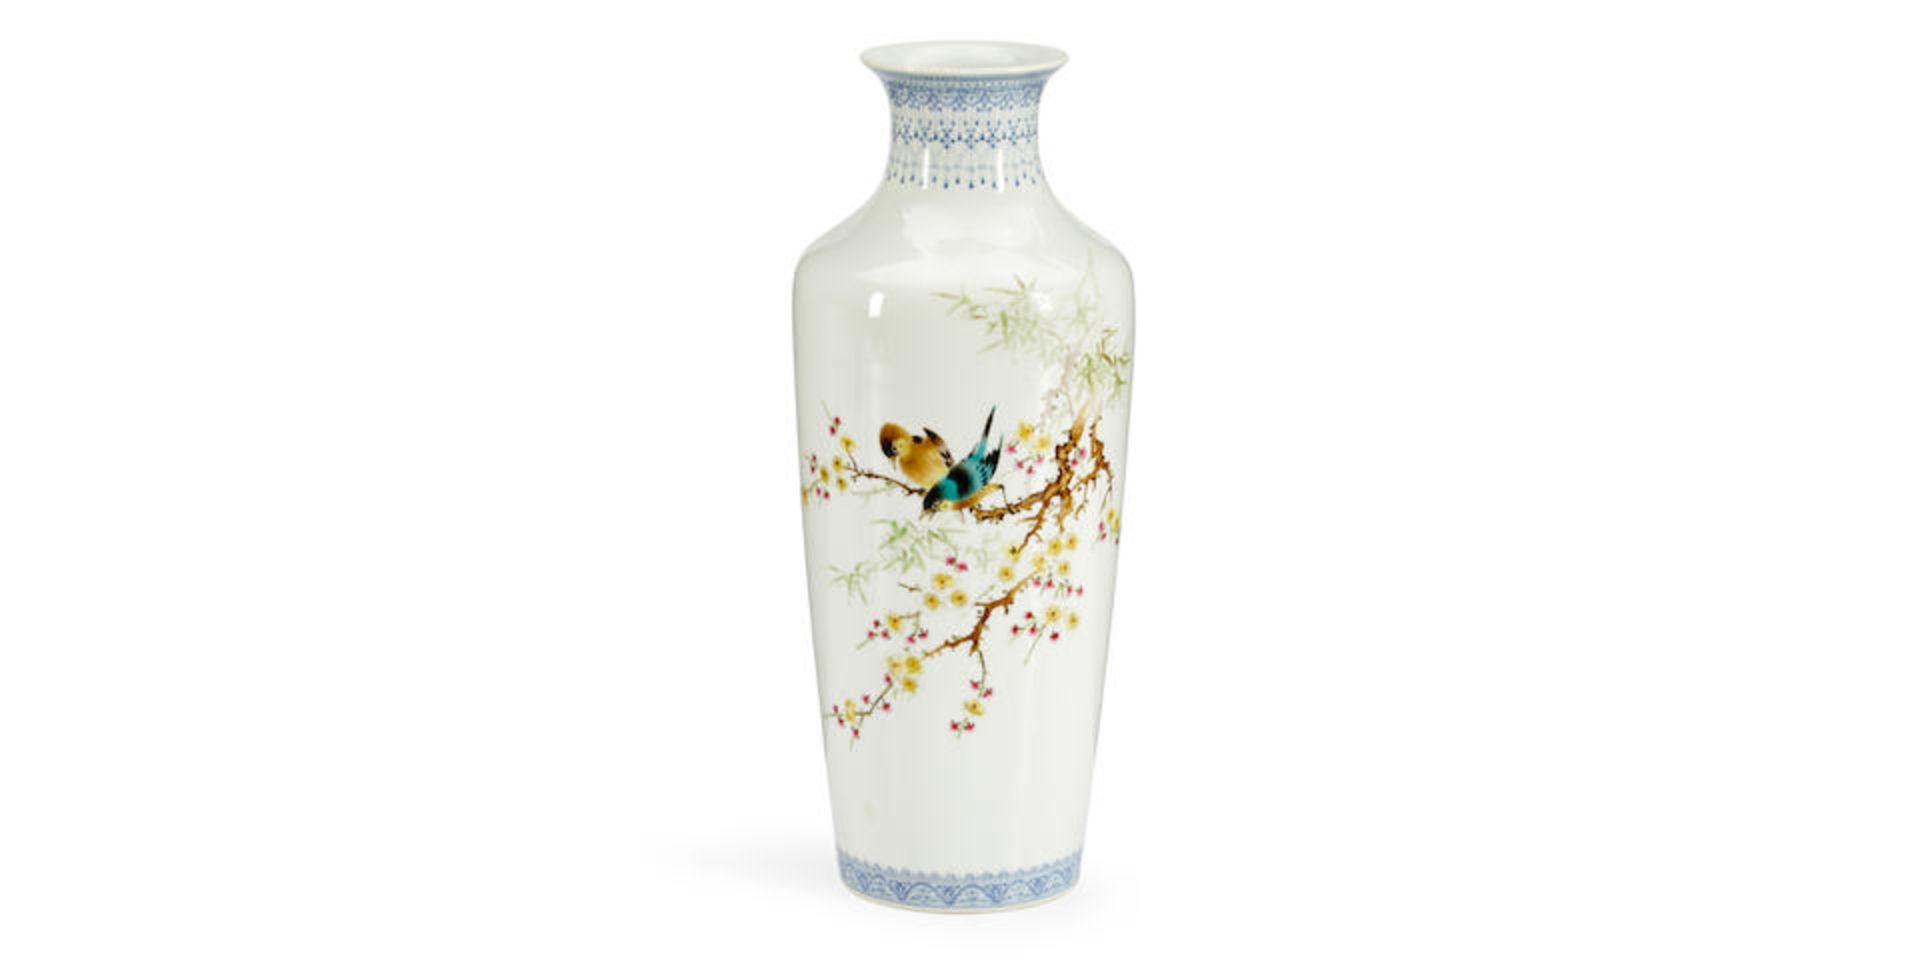 ATTRIBUTED TO LIU YUCEN (1904-1969) A FAMILLE ROSE 'BIRD' VASE - Image 2 of 4